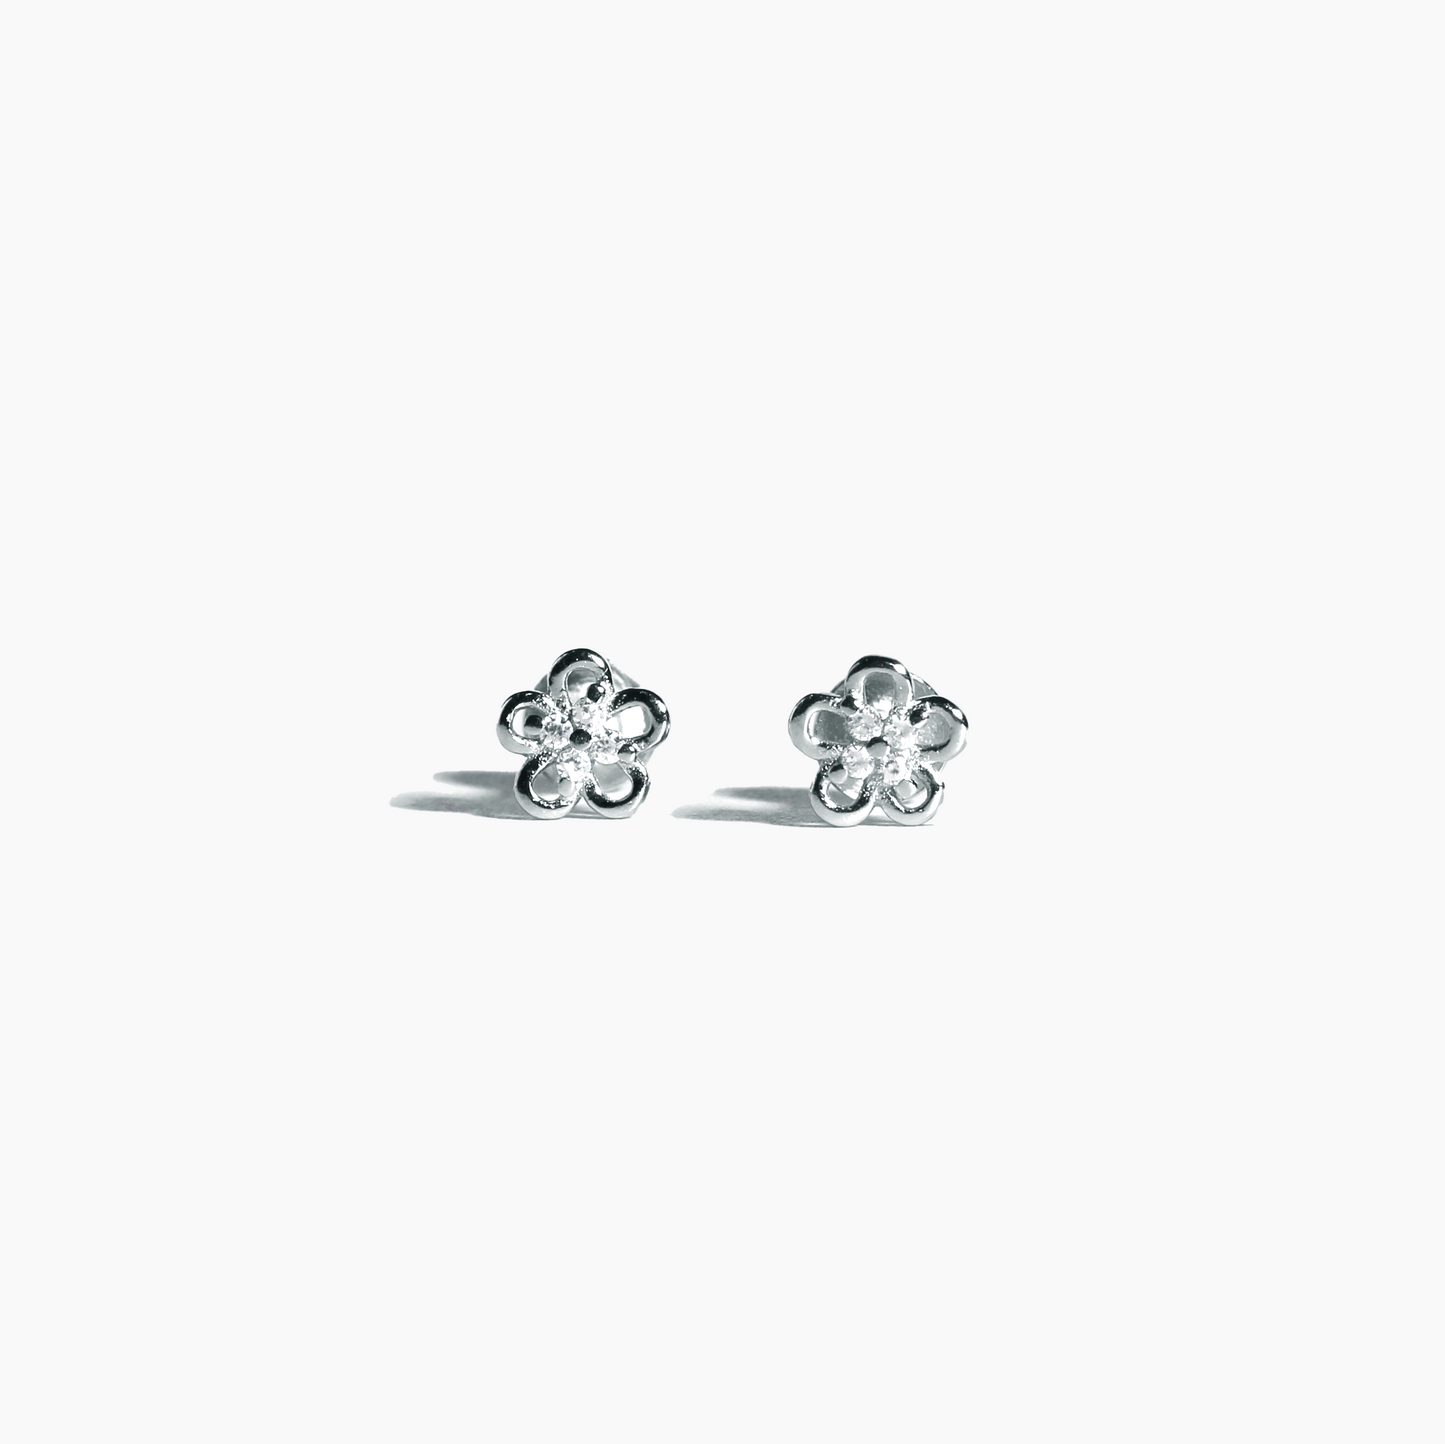 Cheery Blossom 925 Sterling Silver Studs